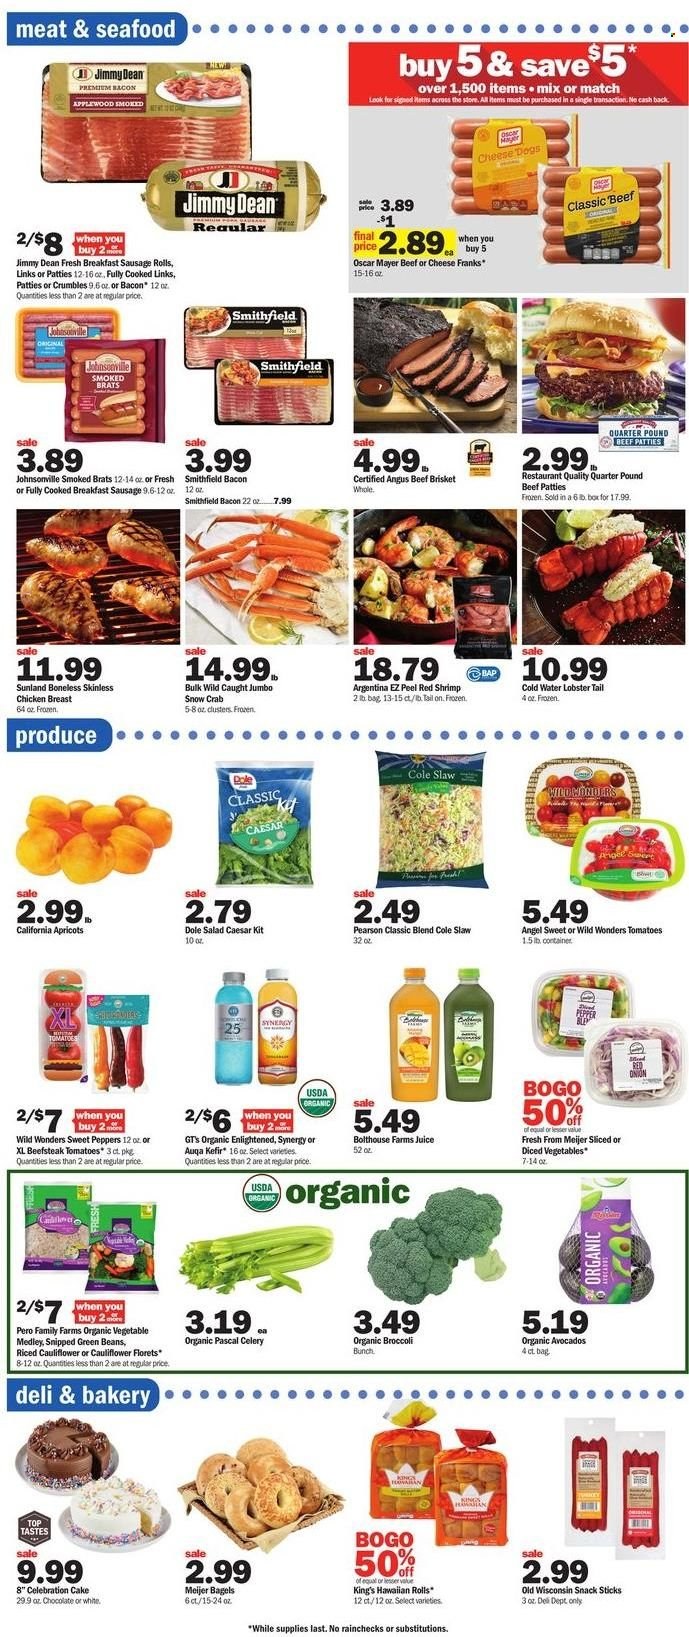 thumbnail - Meijer Flyer - 05/22/2022 - 05/28/2022 - Sales products - bagels, sausage rolls, cake, hawaiian rolls, broccoli, celery, green beans, sweet peppers, tomatoes, onion, salad, Dole, peppers, avocado, apricots, lobster, seafood, crab, lobster tail, shrimps, Jimmy Dean, bacon, Johnsonville, Oscar Mayer, sausage, Clover, kefir, Enlightened lce Cream, chocolate, snack, Celebration, pepper, juice, chicken breasts, beef meat, beef brisket, container. Page 4.